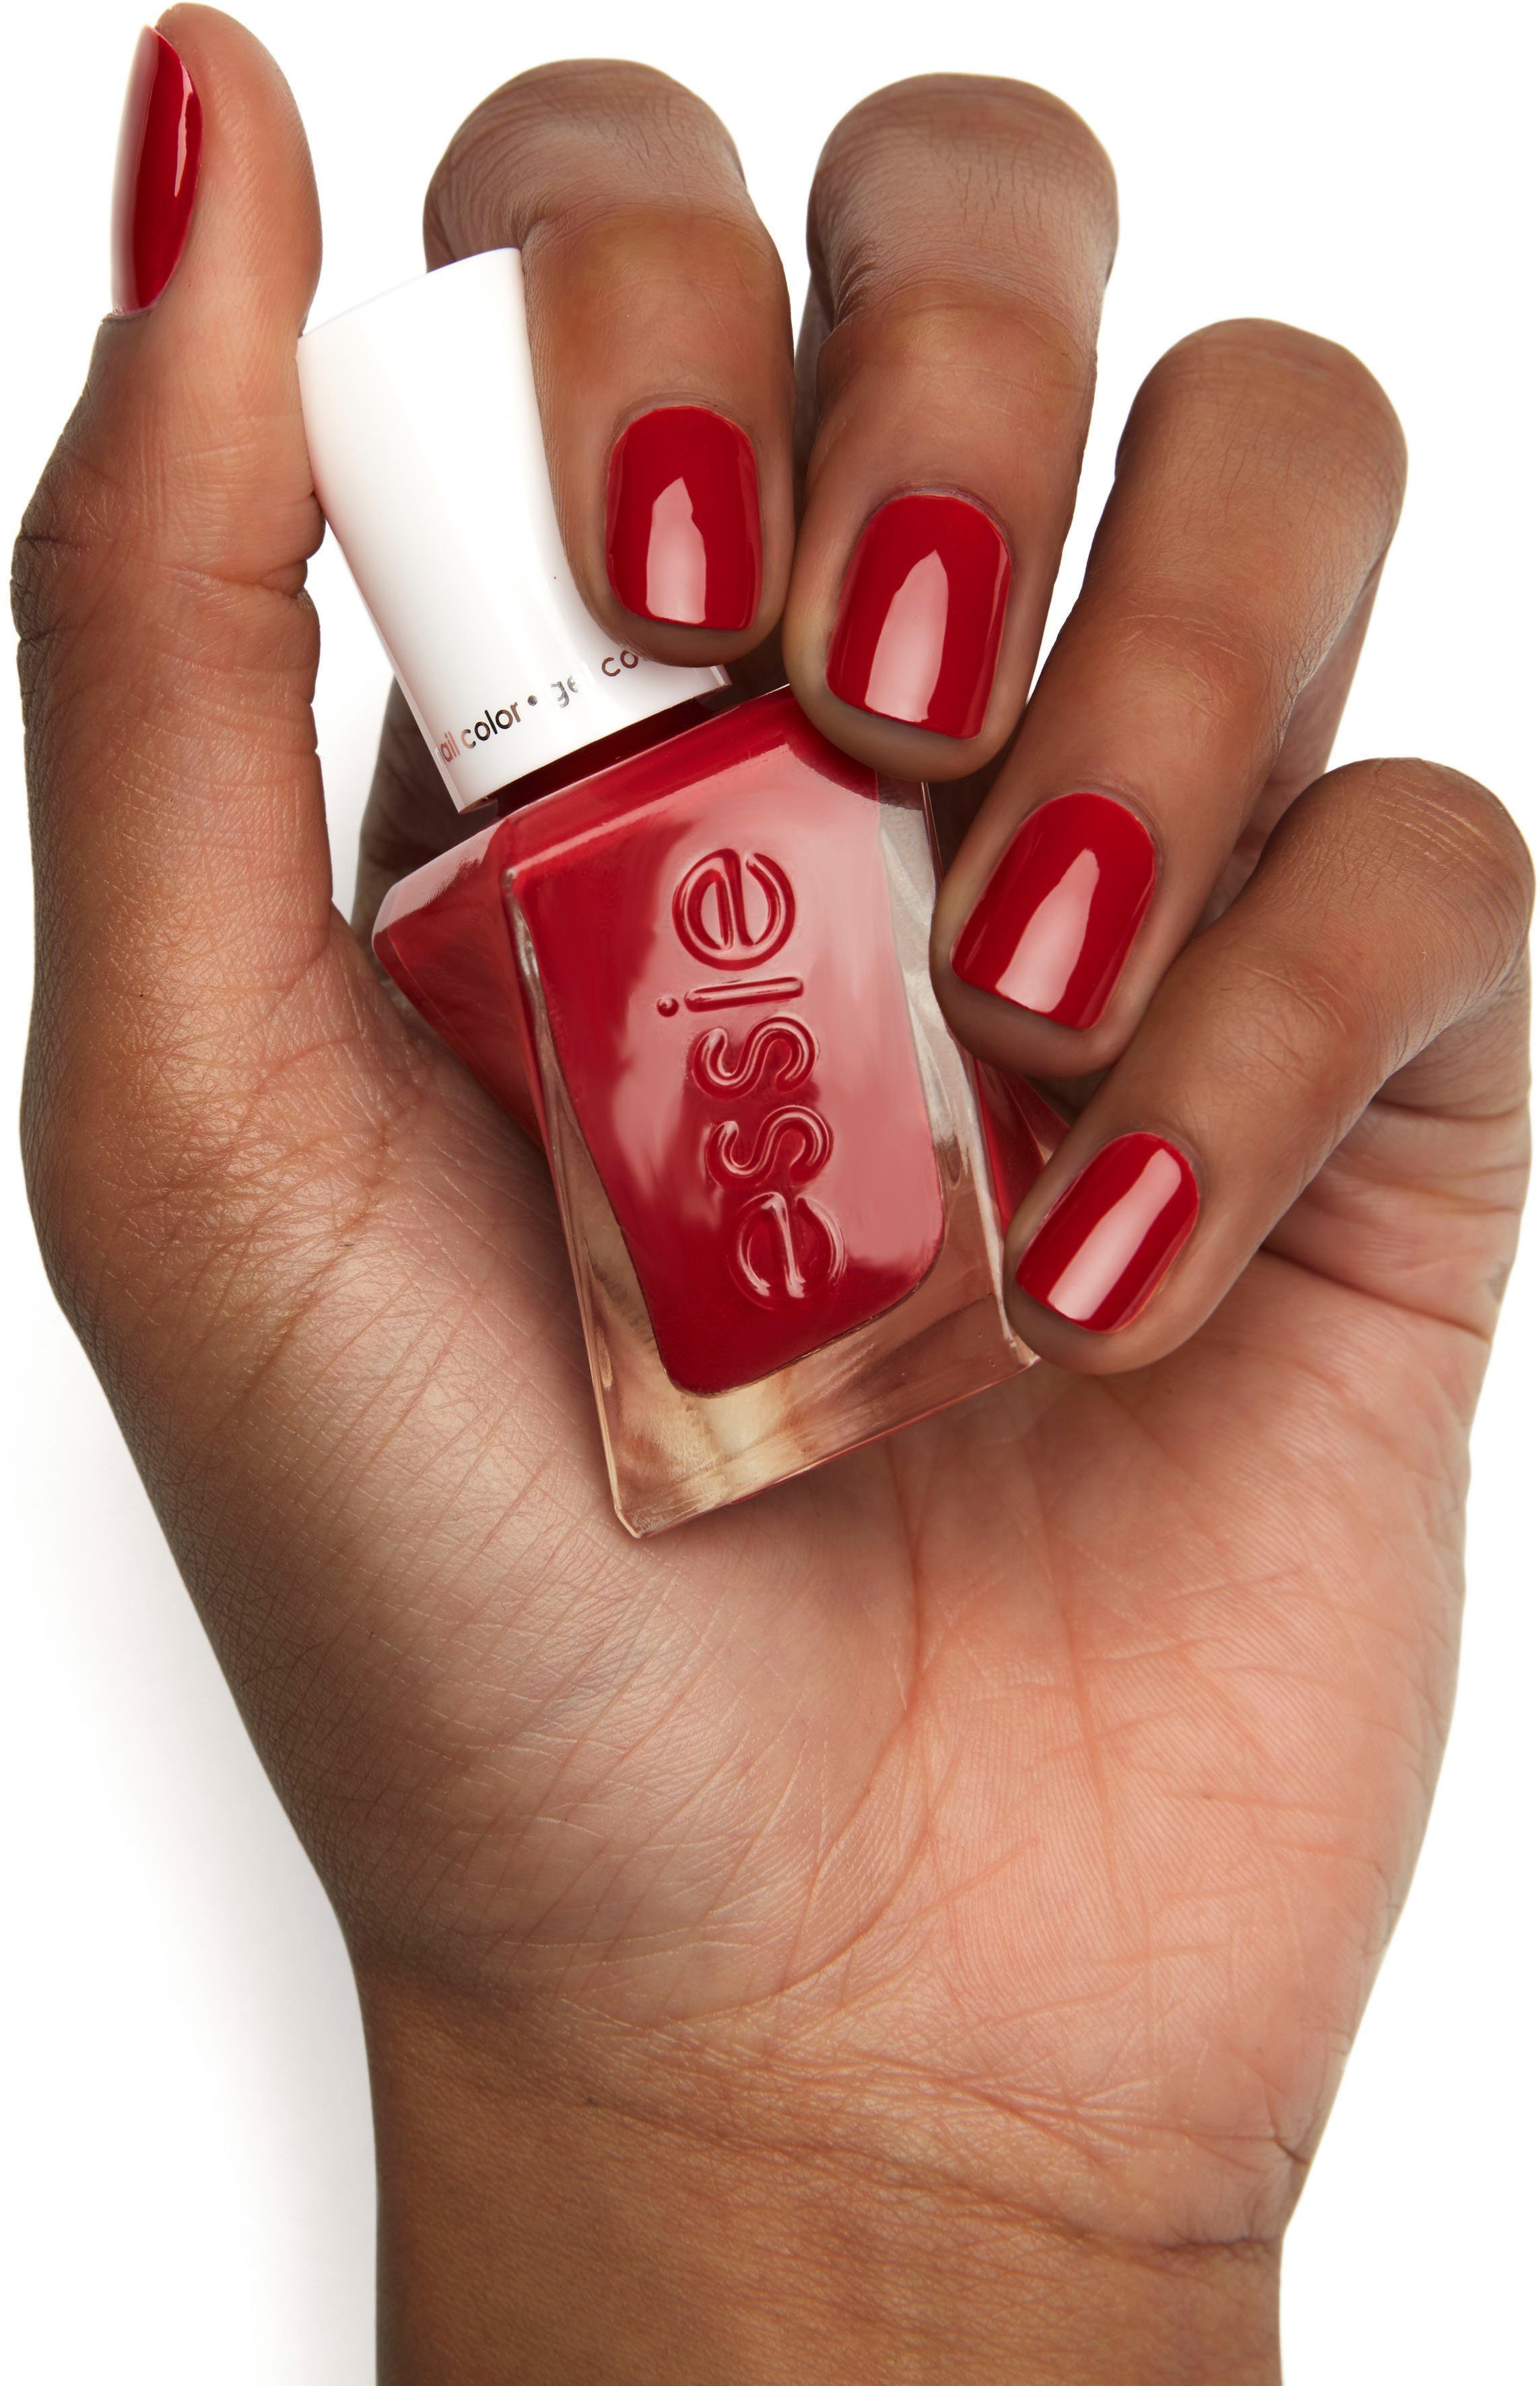 Couture essie Rot 509 gown Gel red the Gel-Nagellack Paint Nr.